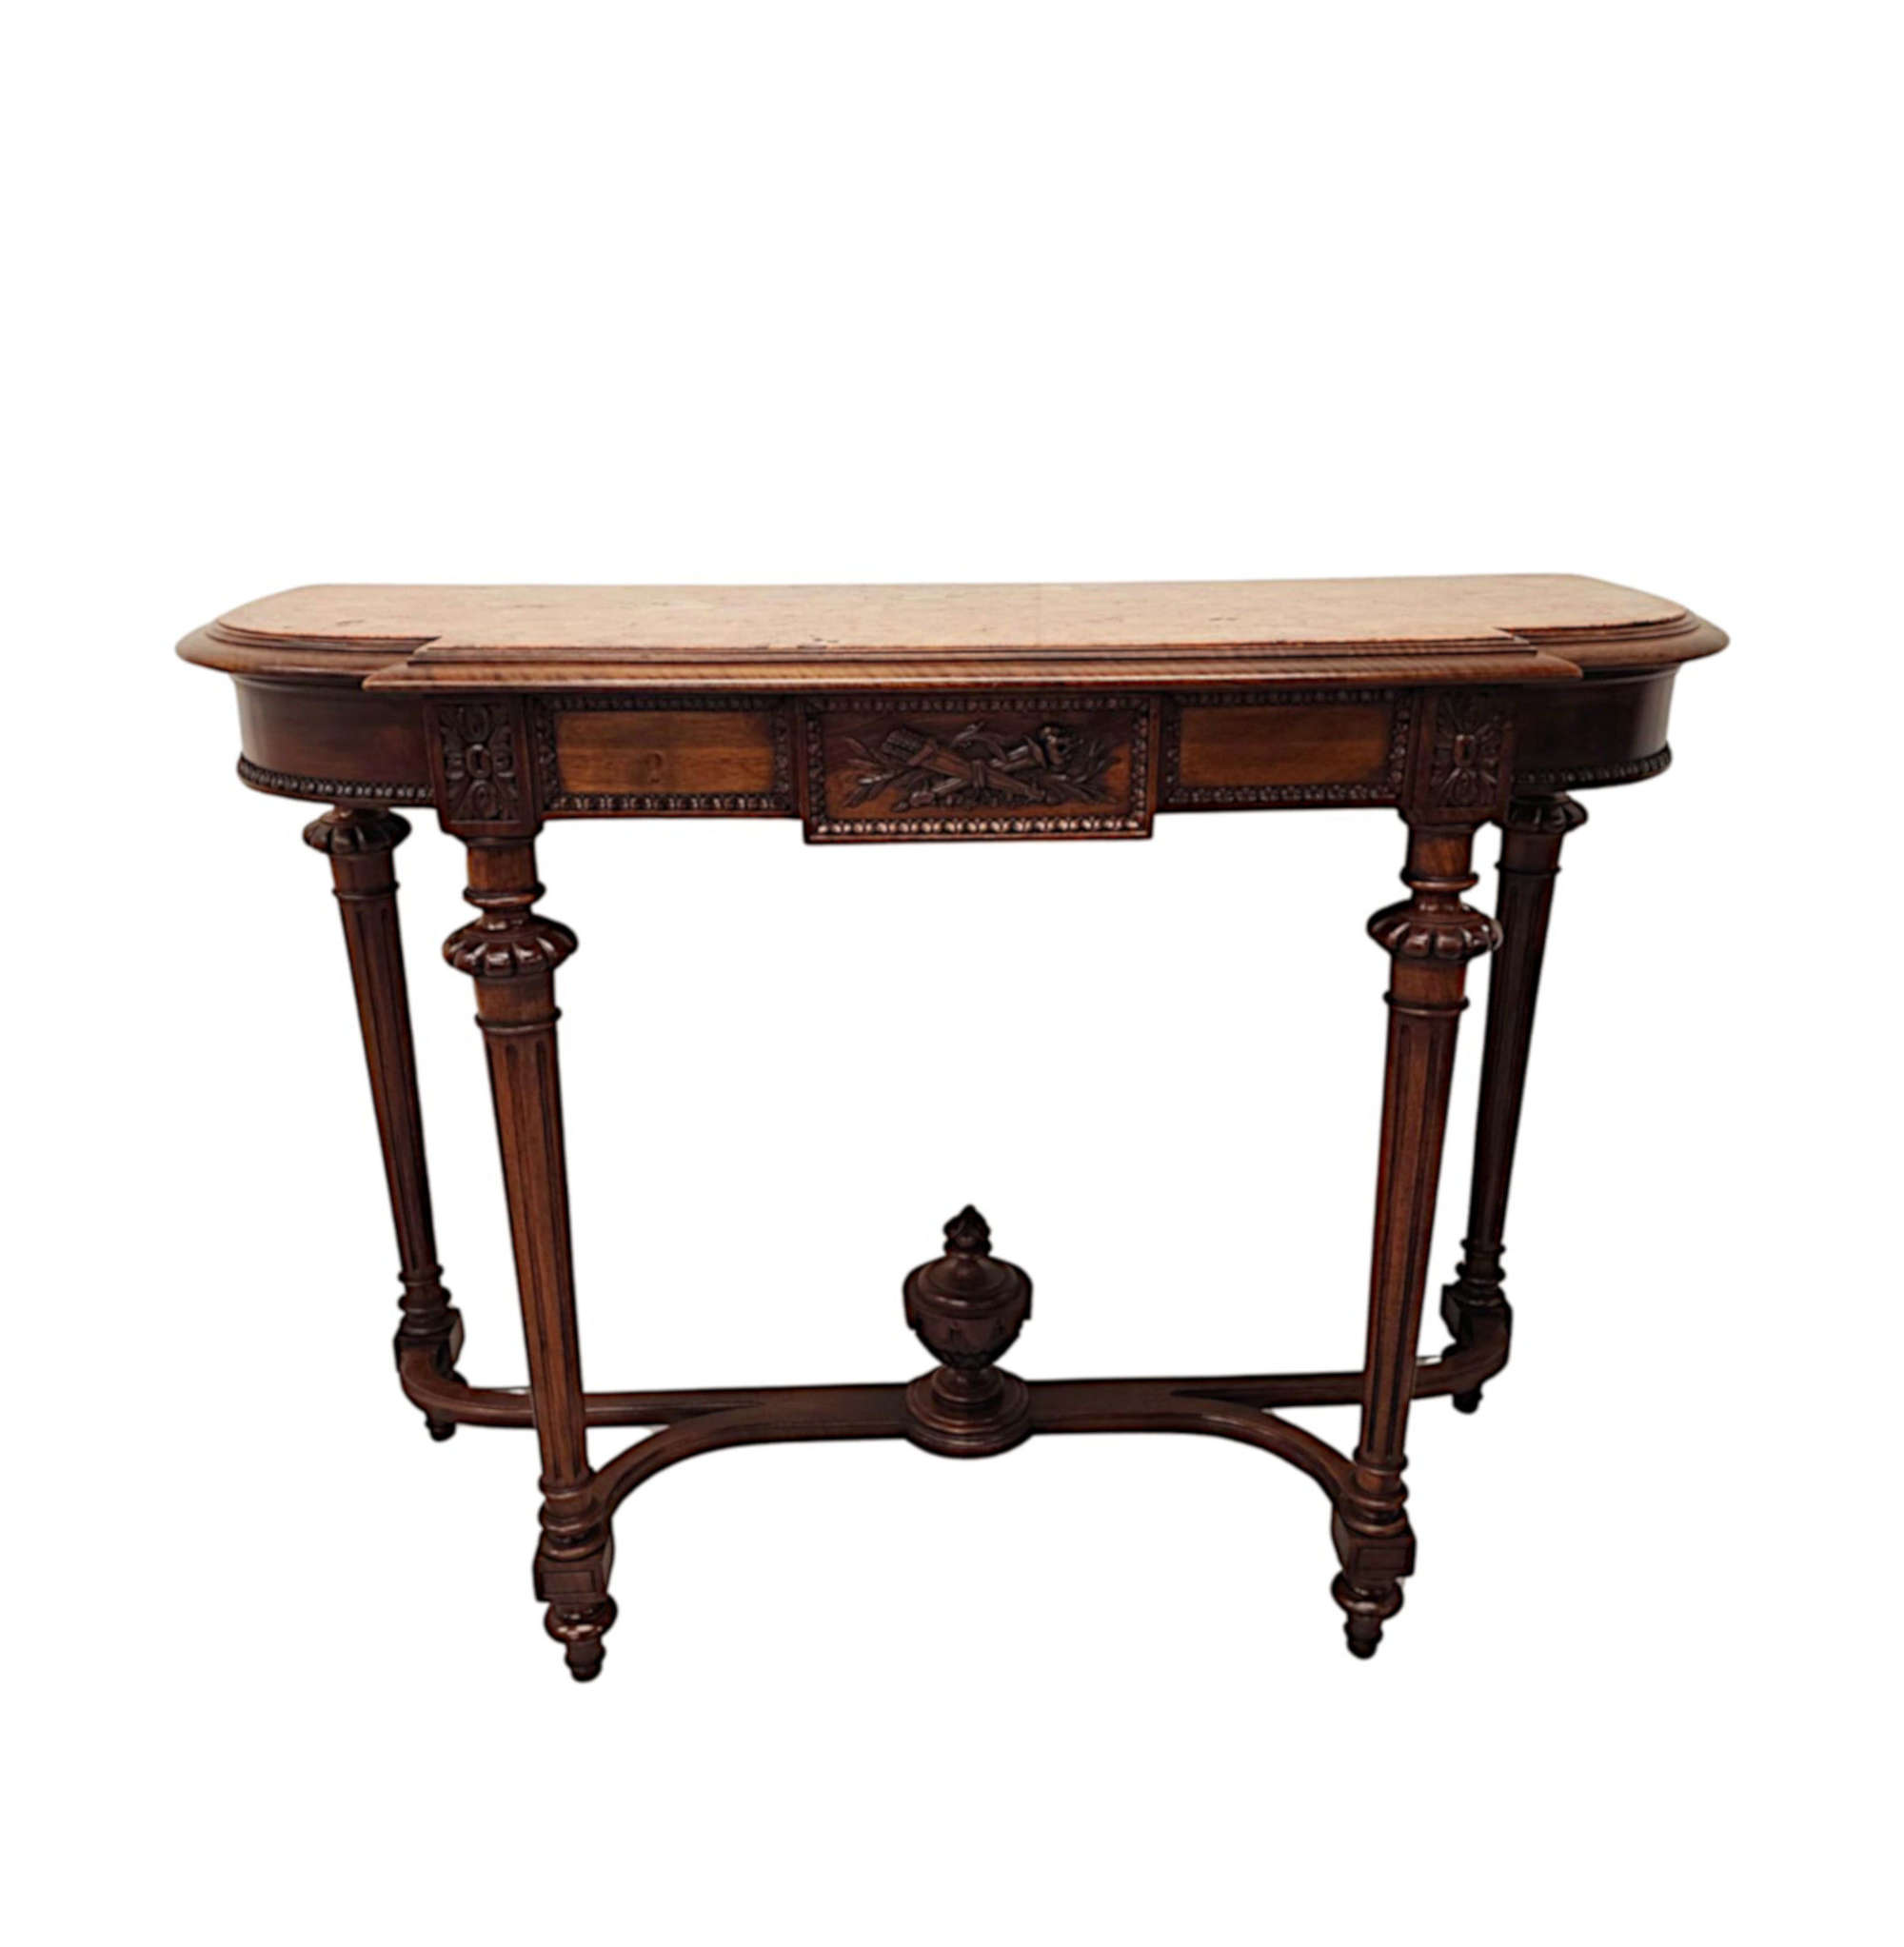 A Very Fine 19th Century Walnut Marble Topped  Antique Console Table